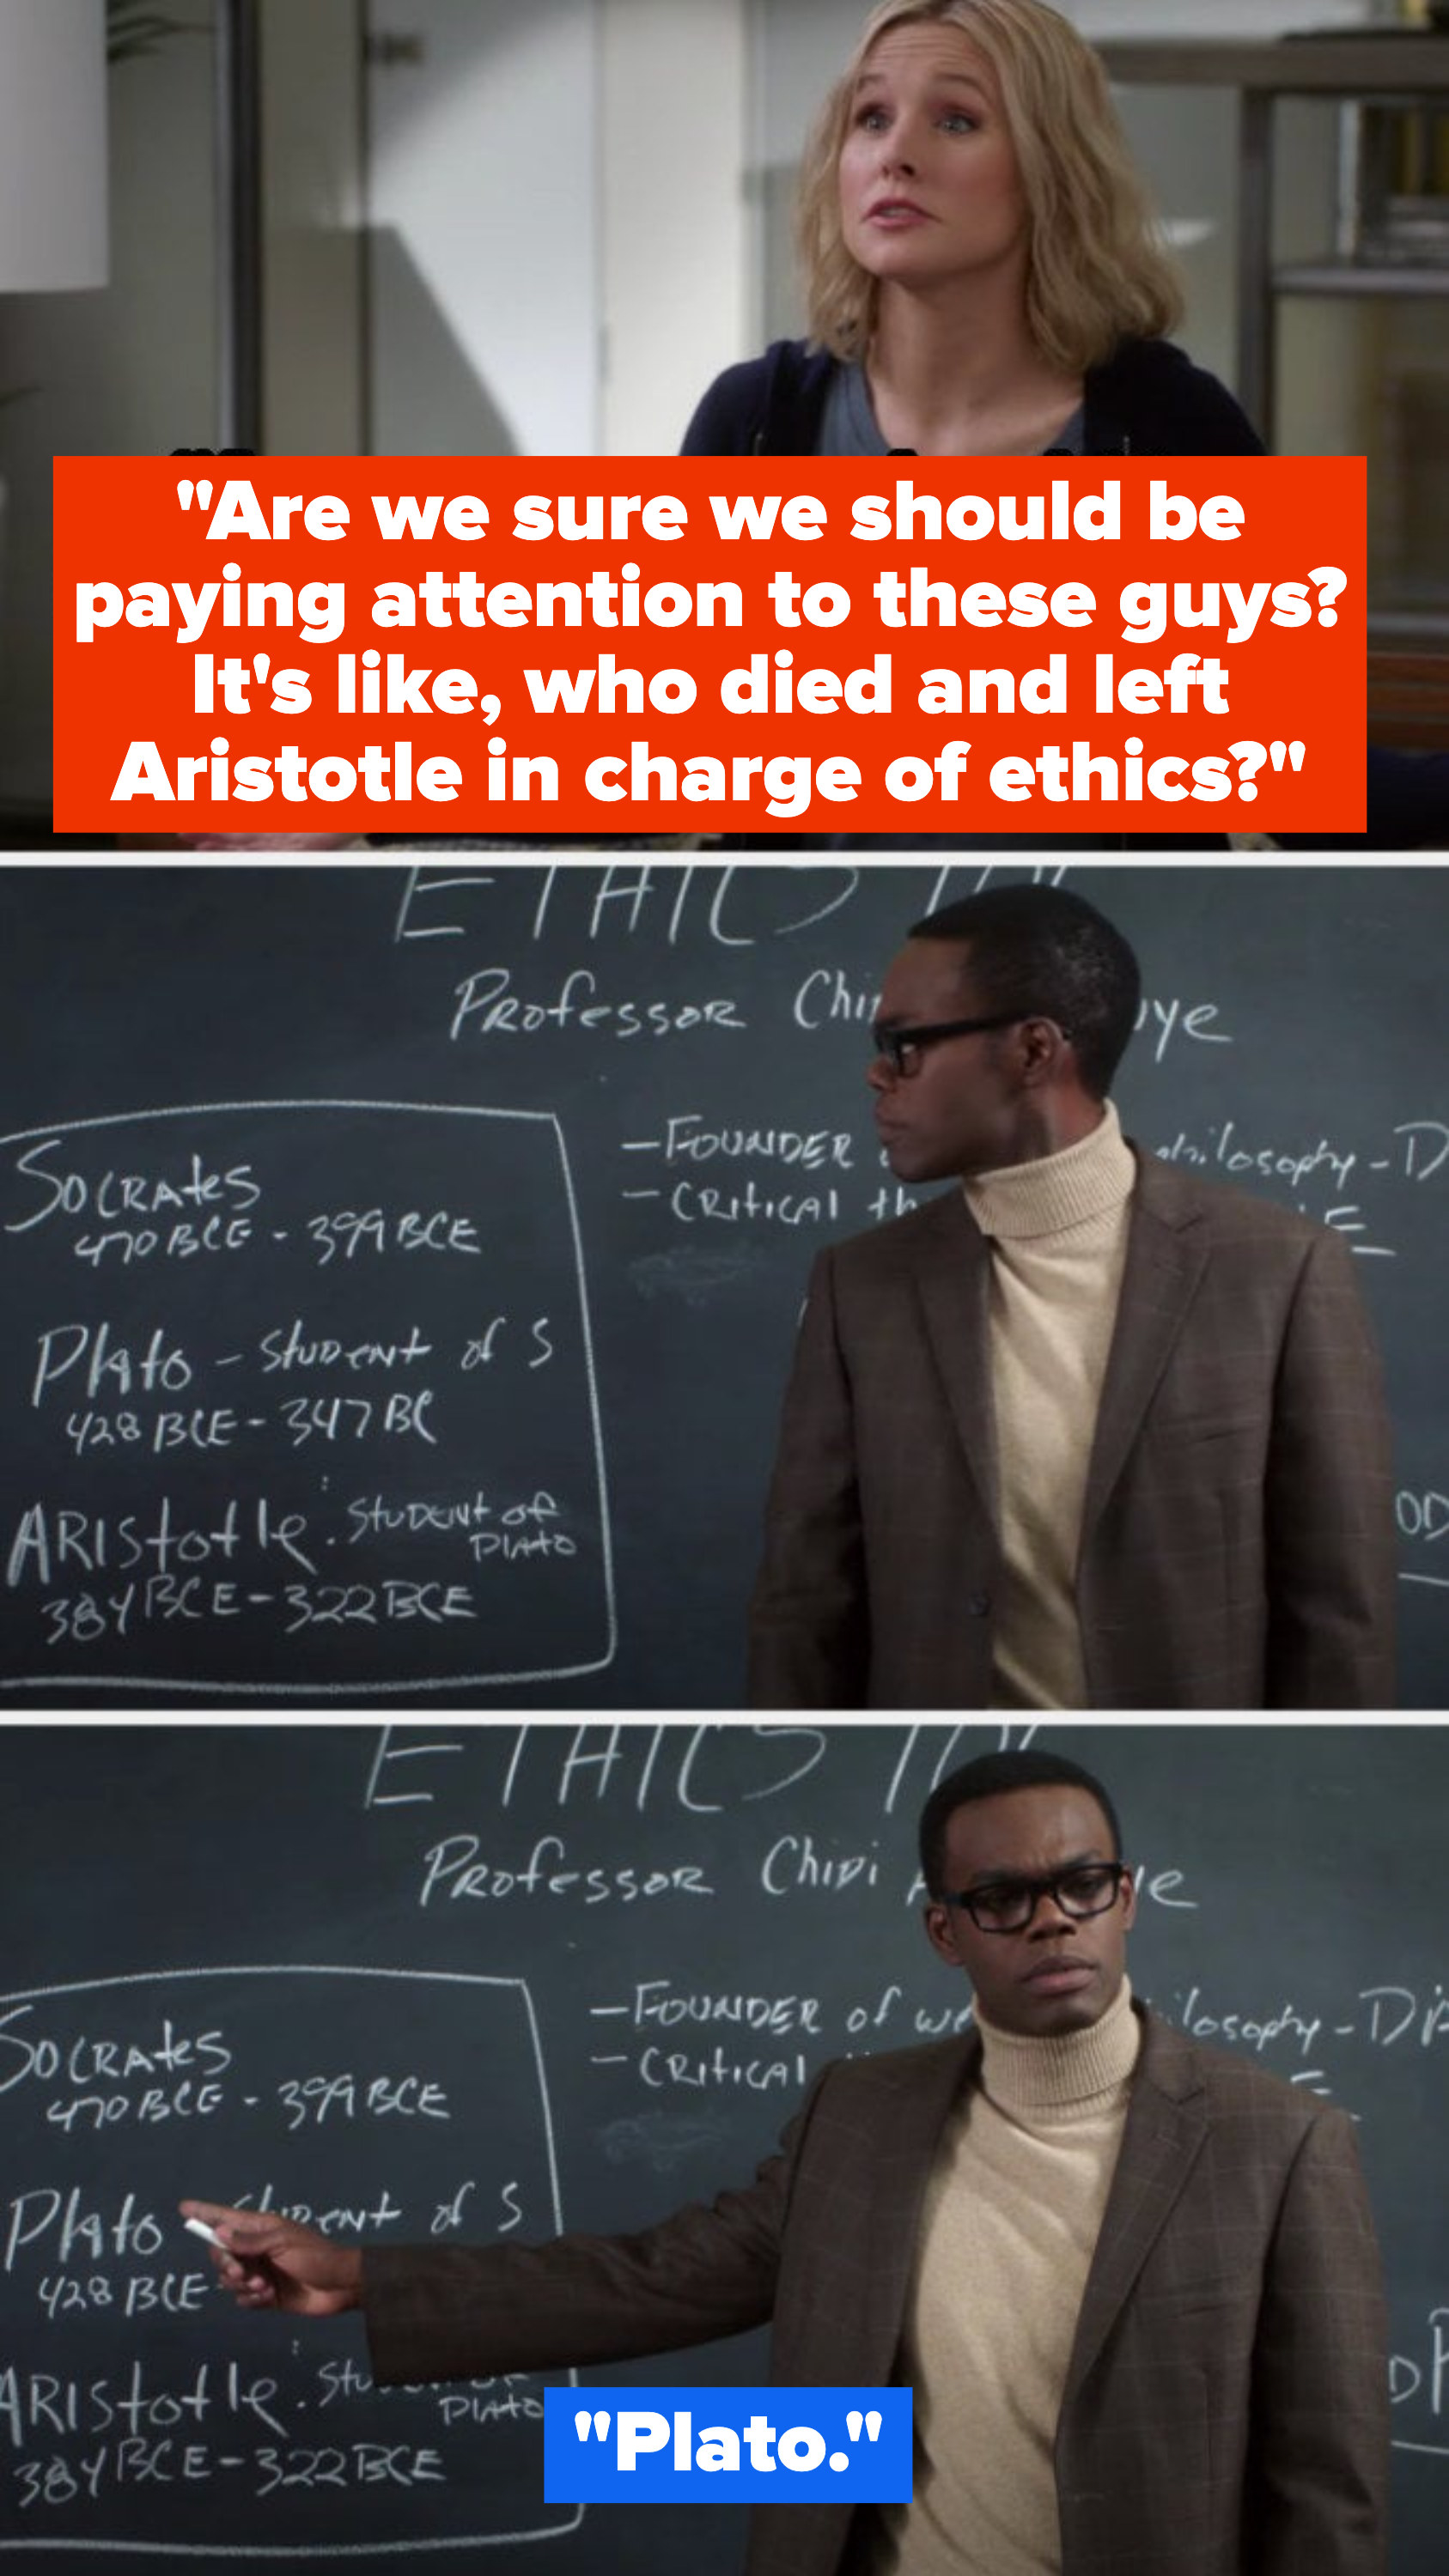 Eleanor: &quot;Are we sure we should be paying attention to these guys? It&#x27;s like, who died and left Aristotle in charge of ethics?&quot; Chidi: (pointing to chalkboard) &quot;Plato&quot;